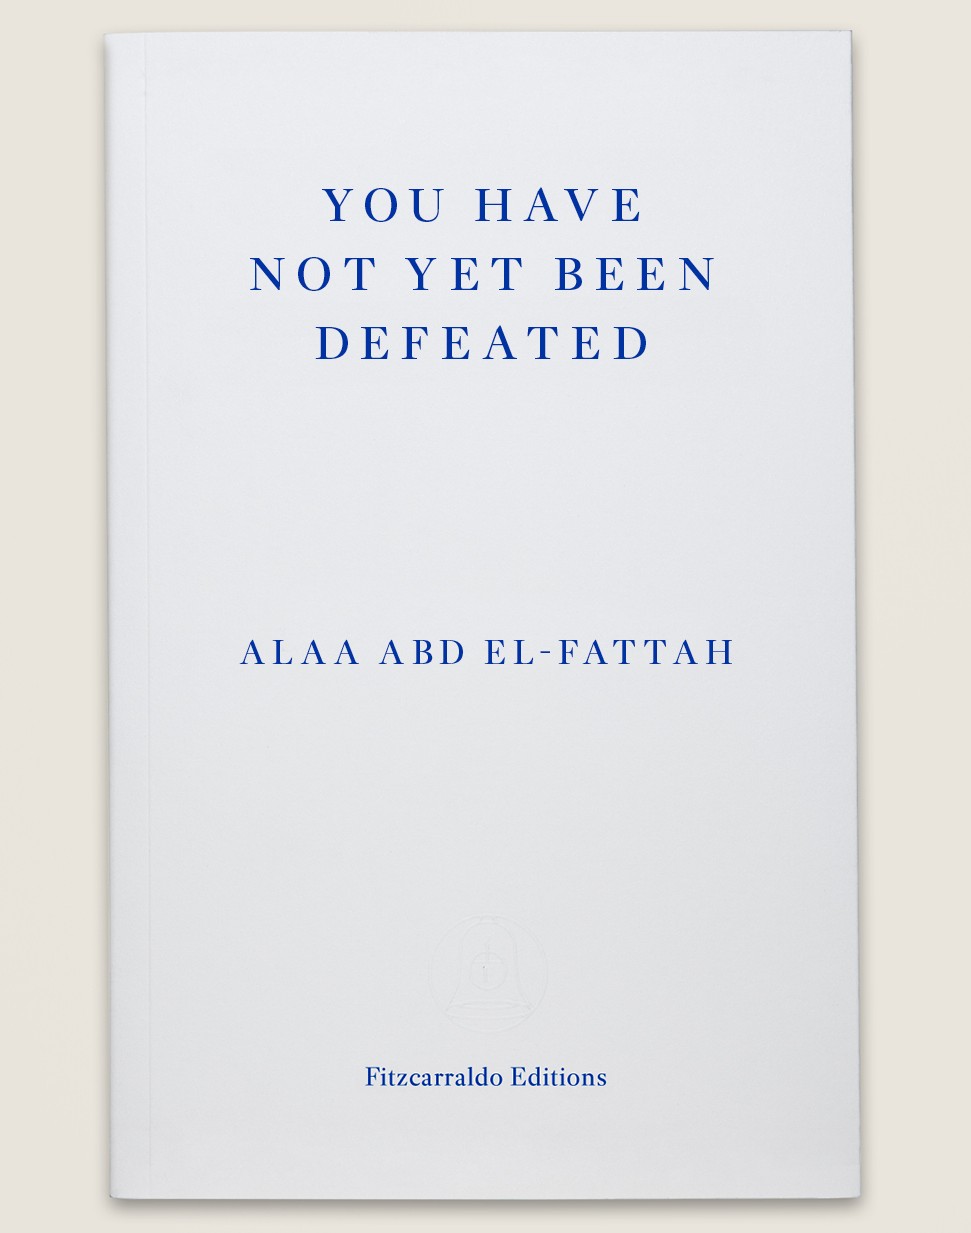 Cover of Alaa Abd el-Fattah's "You have not yet been defeated" (published in English by Fitzcarraldo Editions)